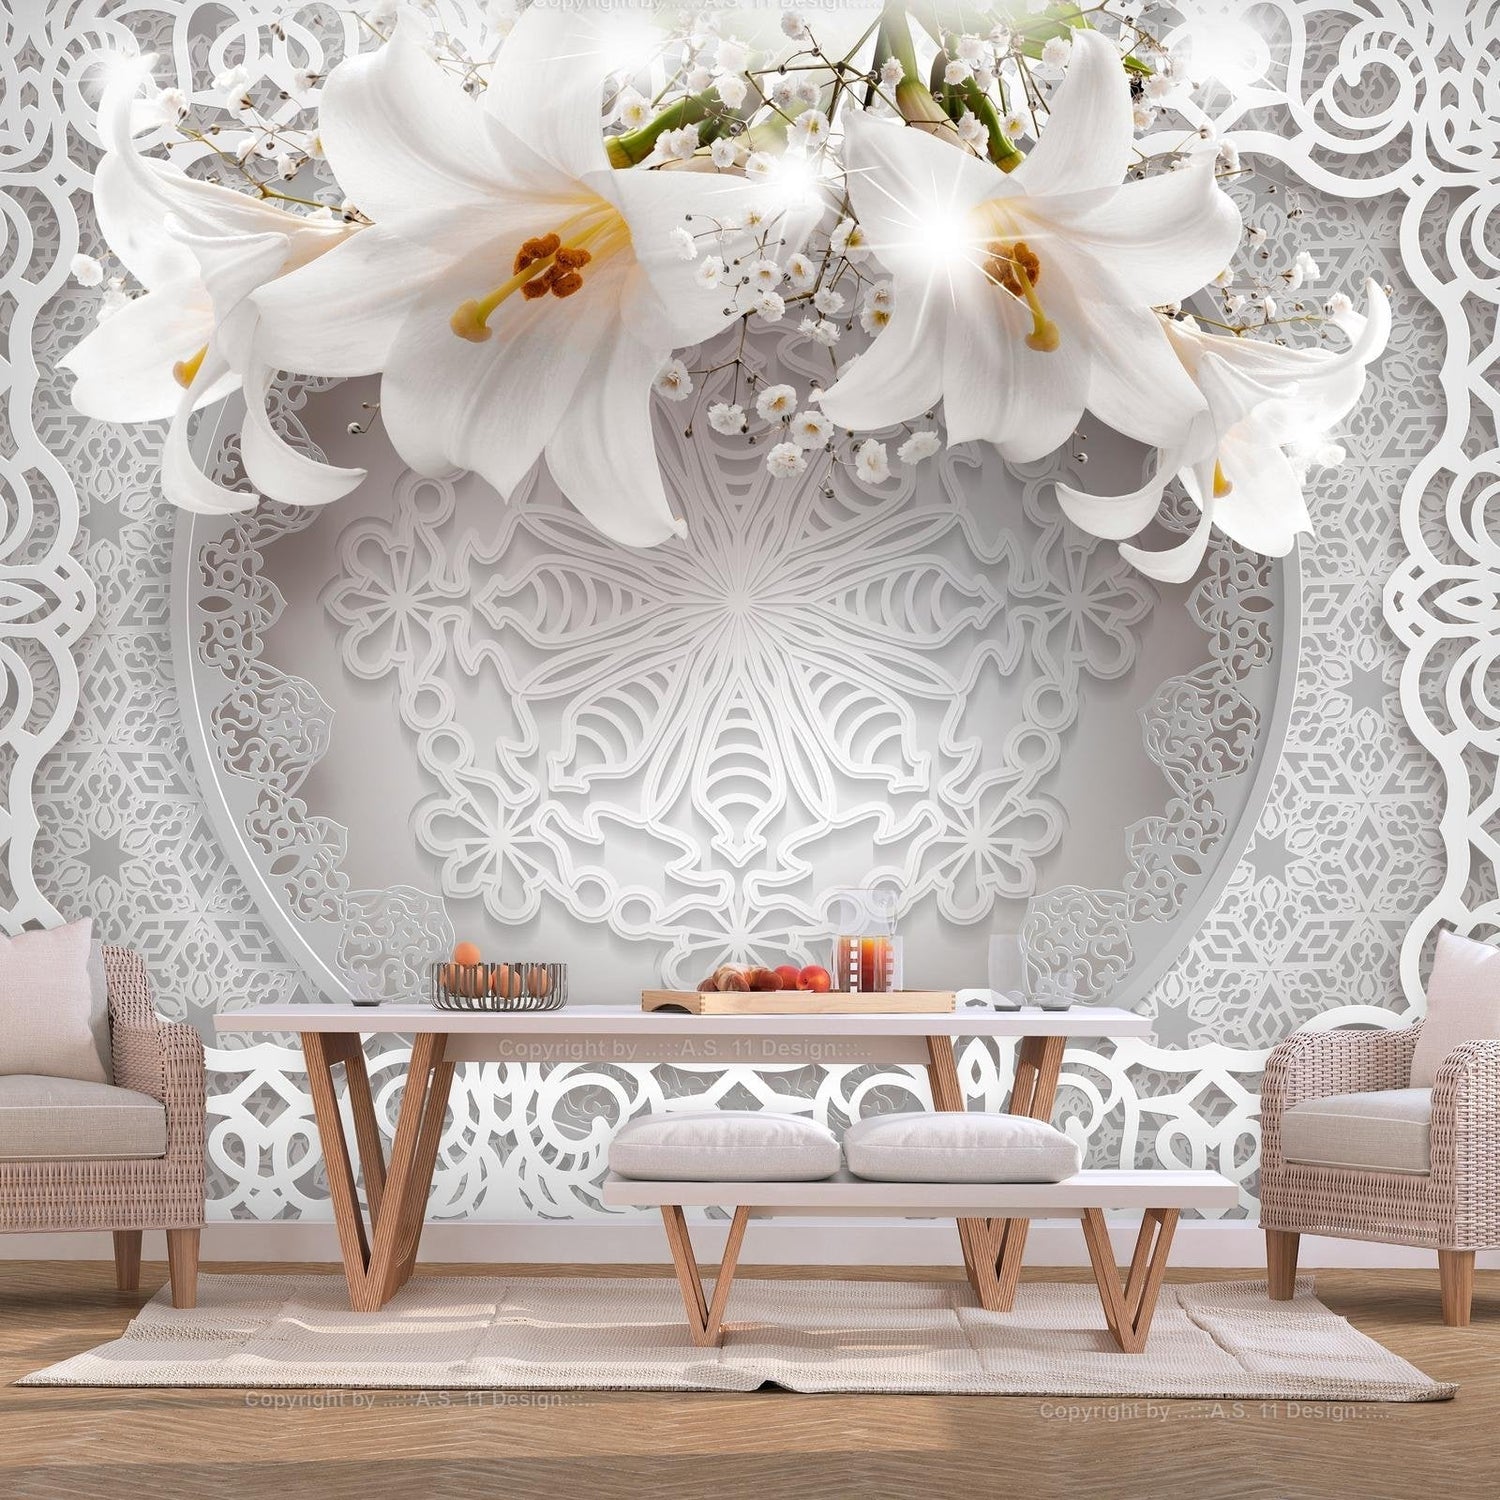 Peel and stick wall mural - Lilies and Ornaments-TipTopHomeDecor